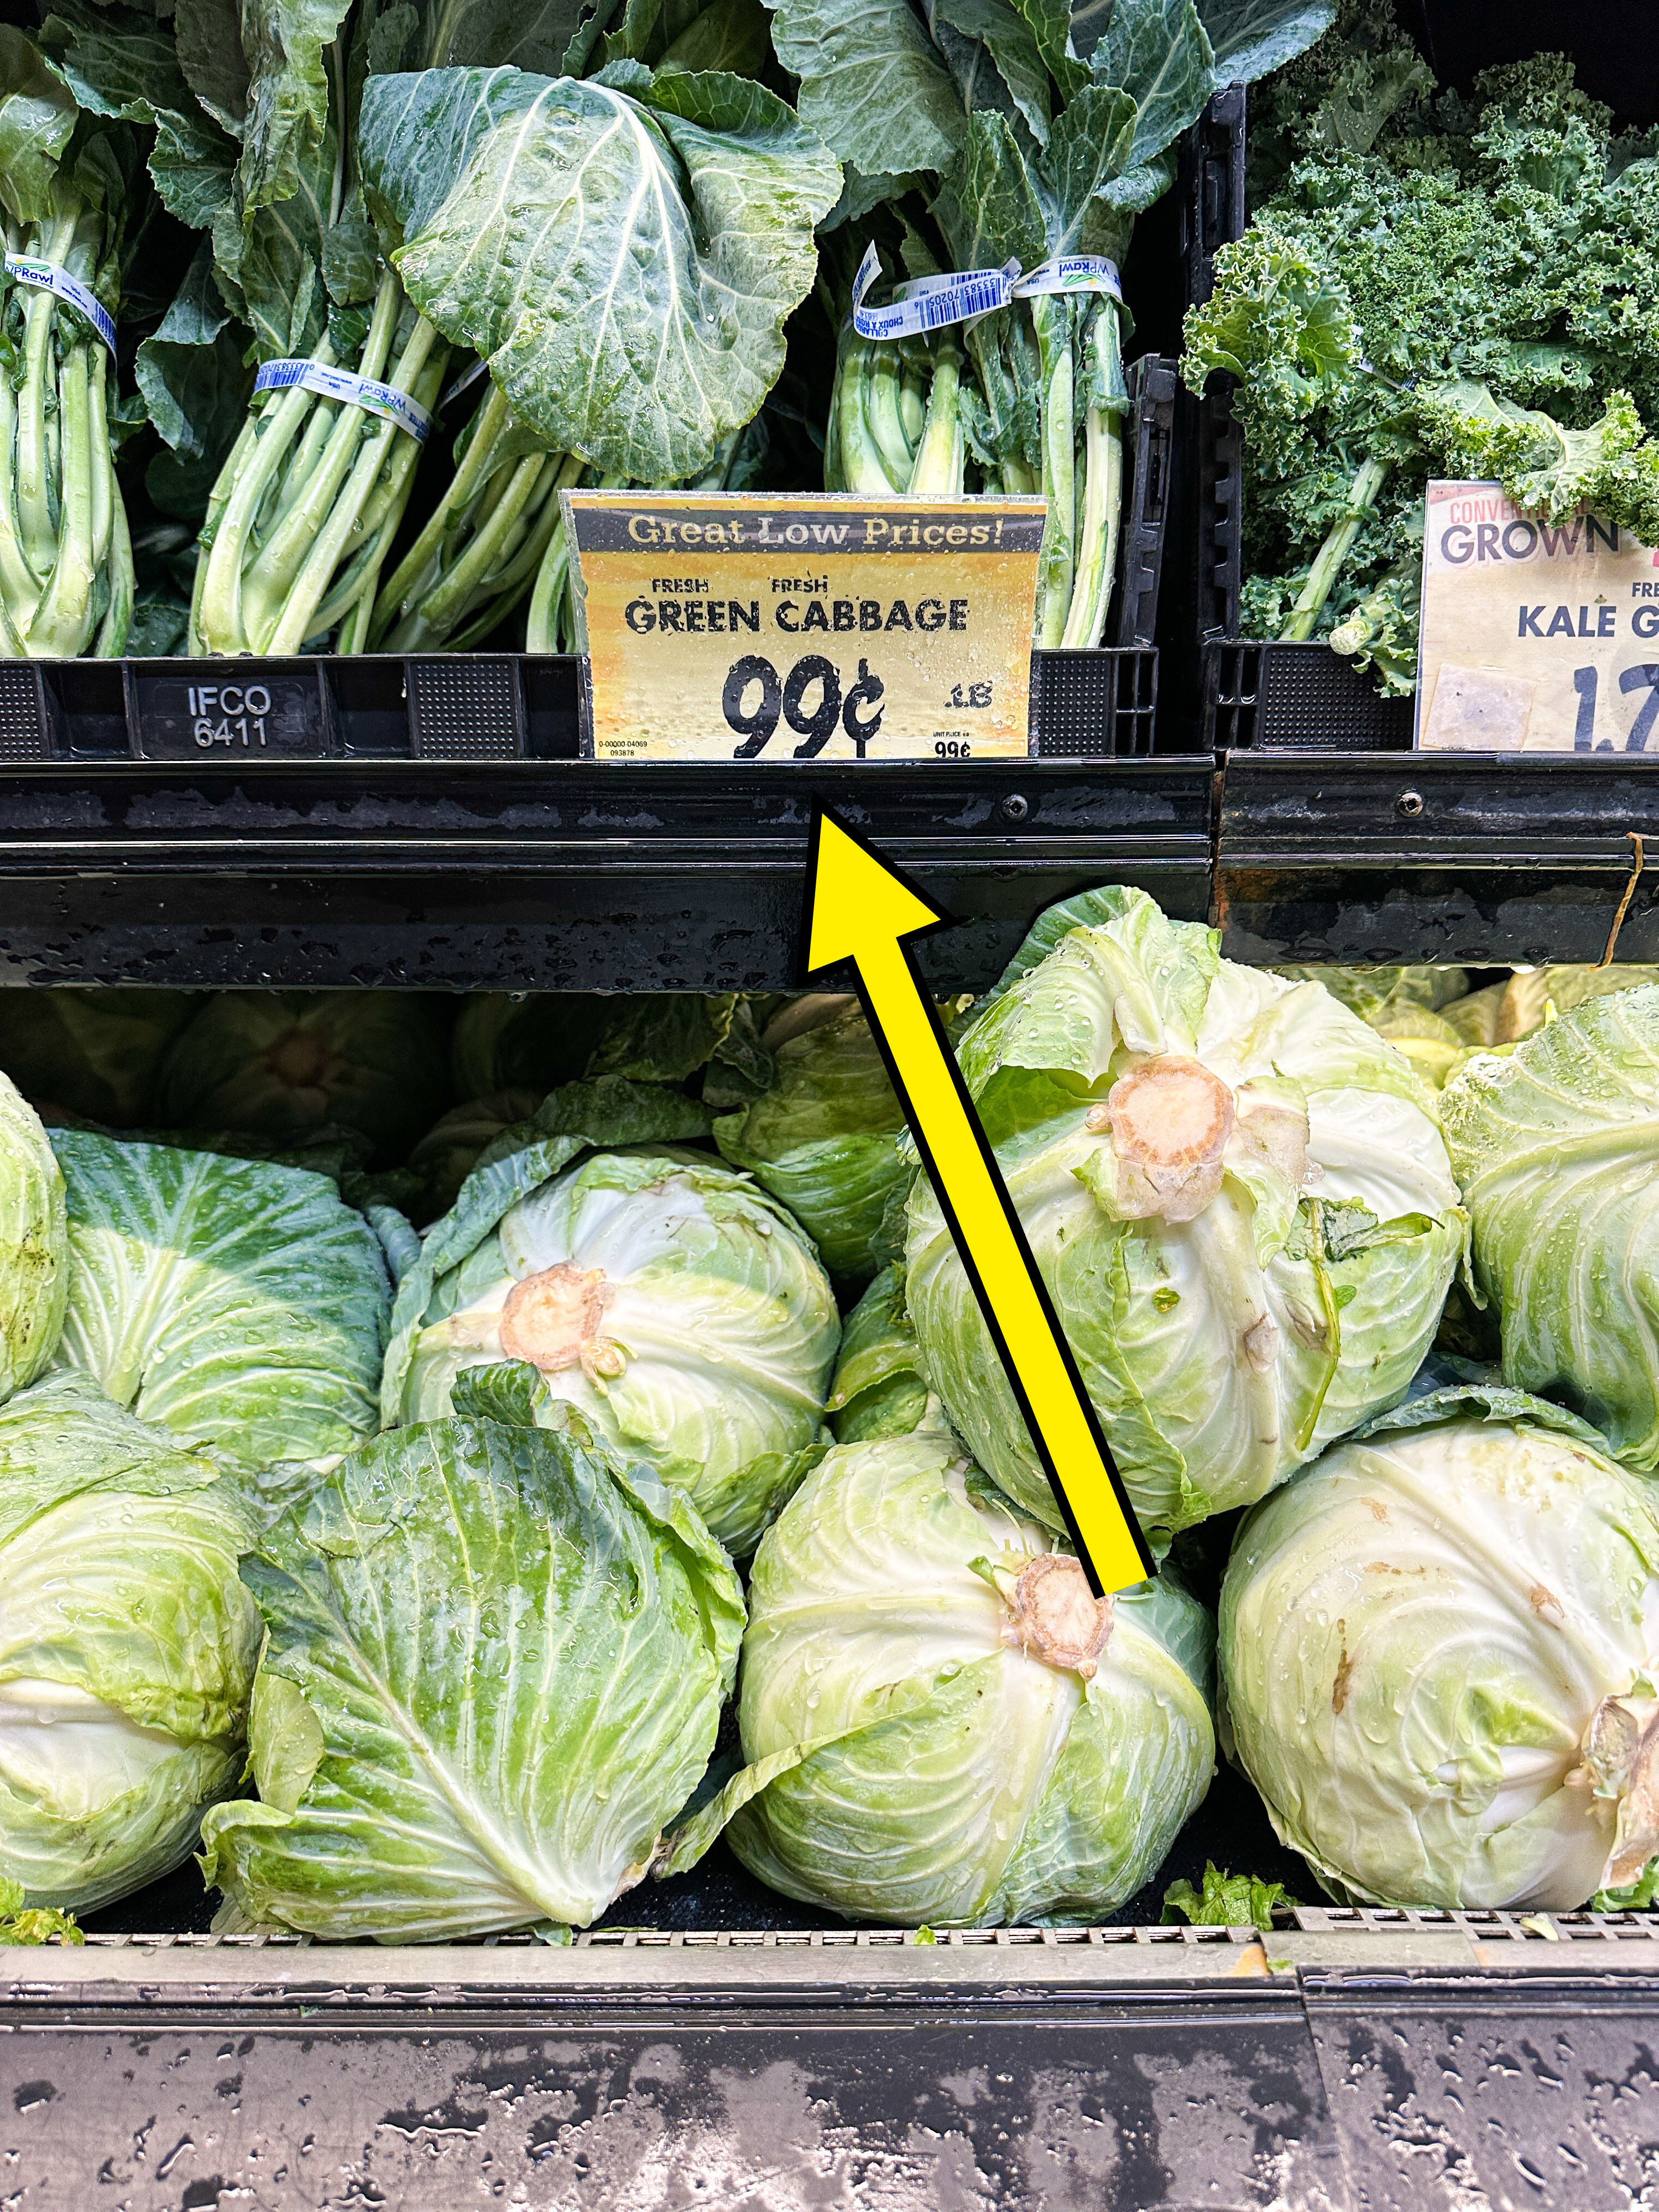 arrow pointing to green cabbage for 99 cents per pound